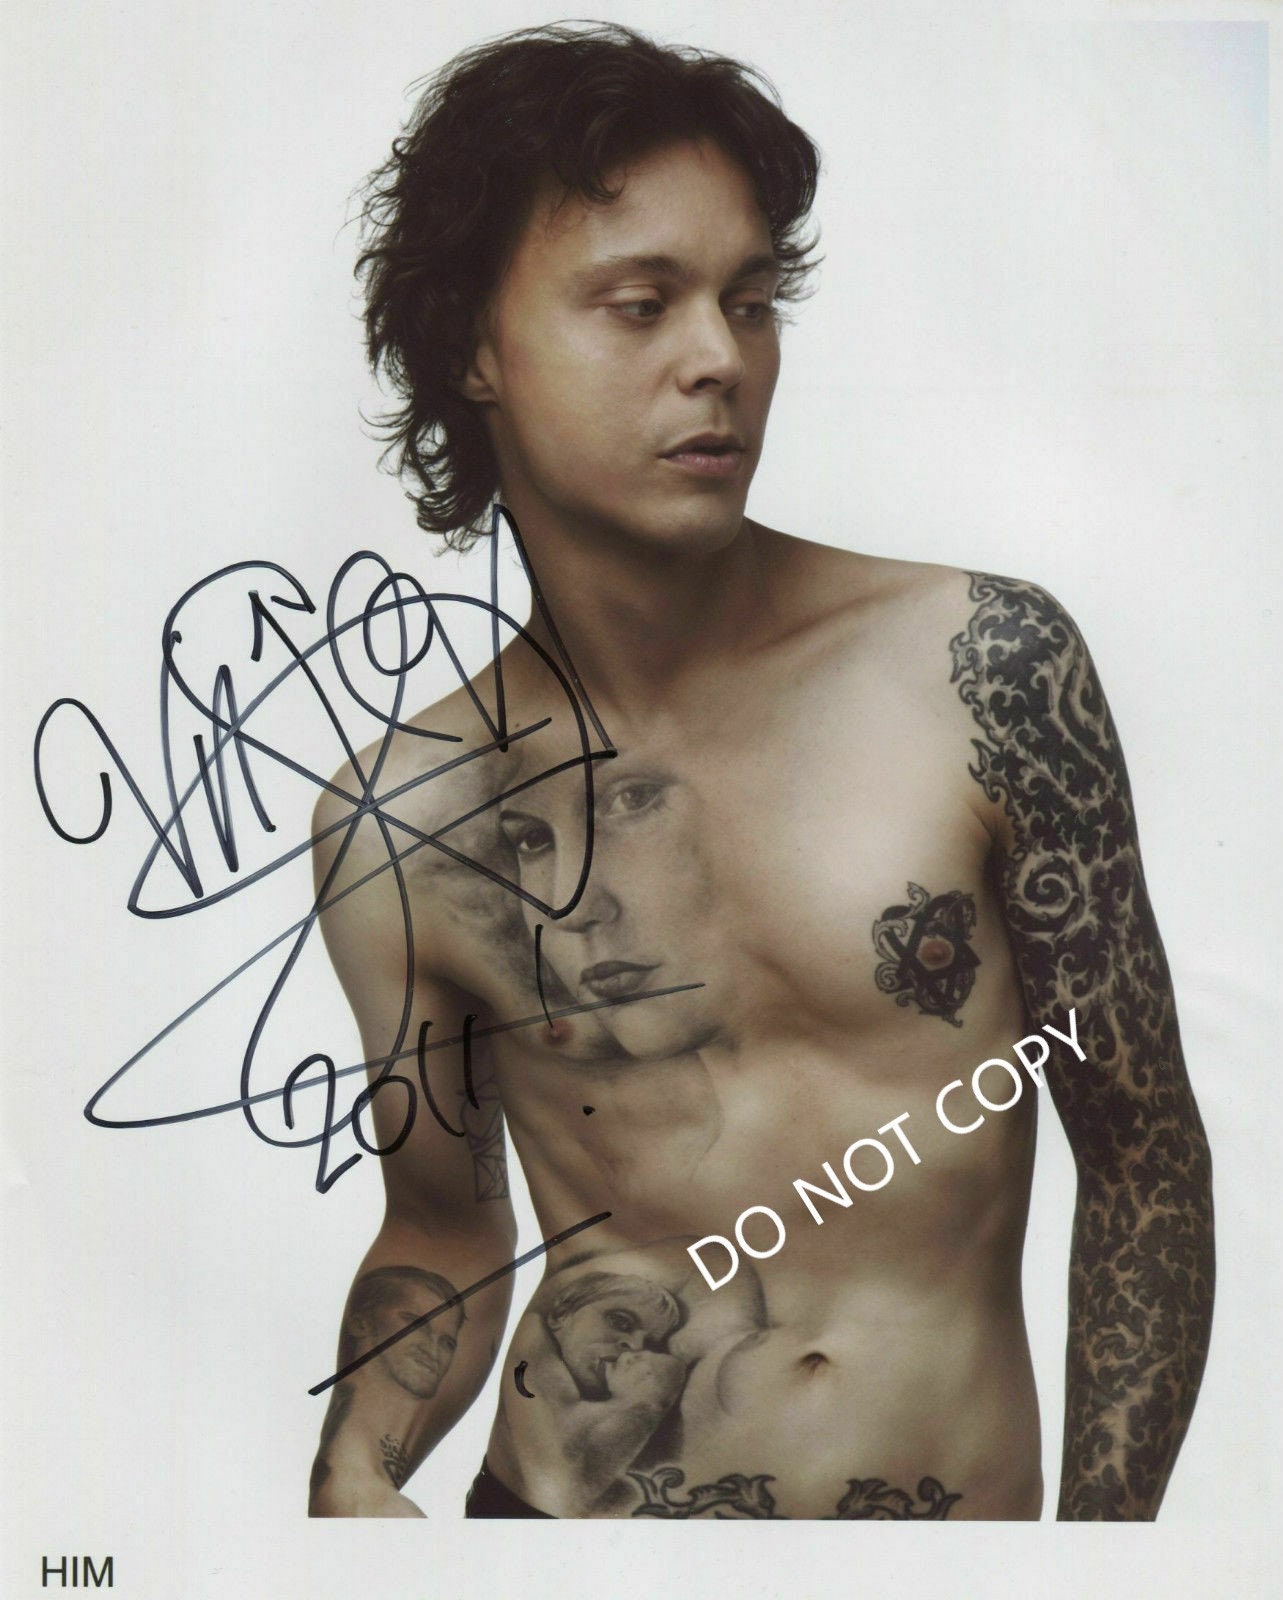 married wi ville valo sex